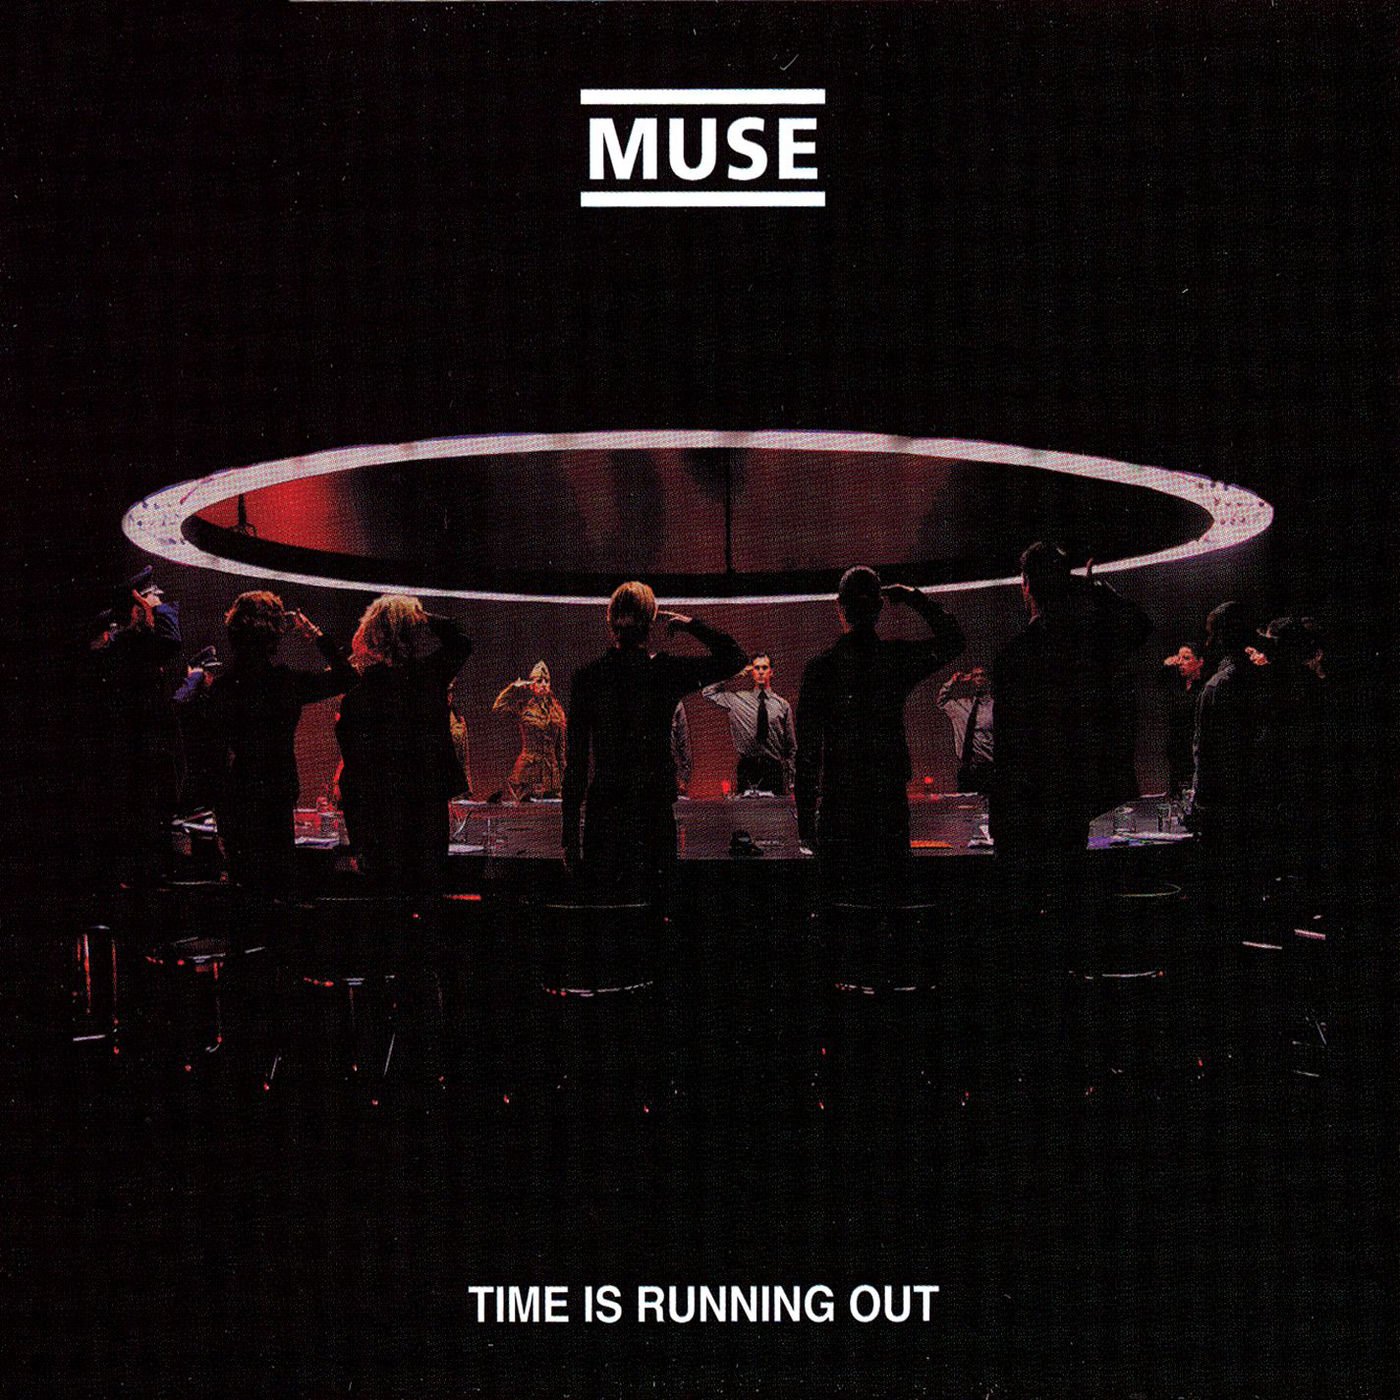 Muse The Groove cover artwork